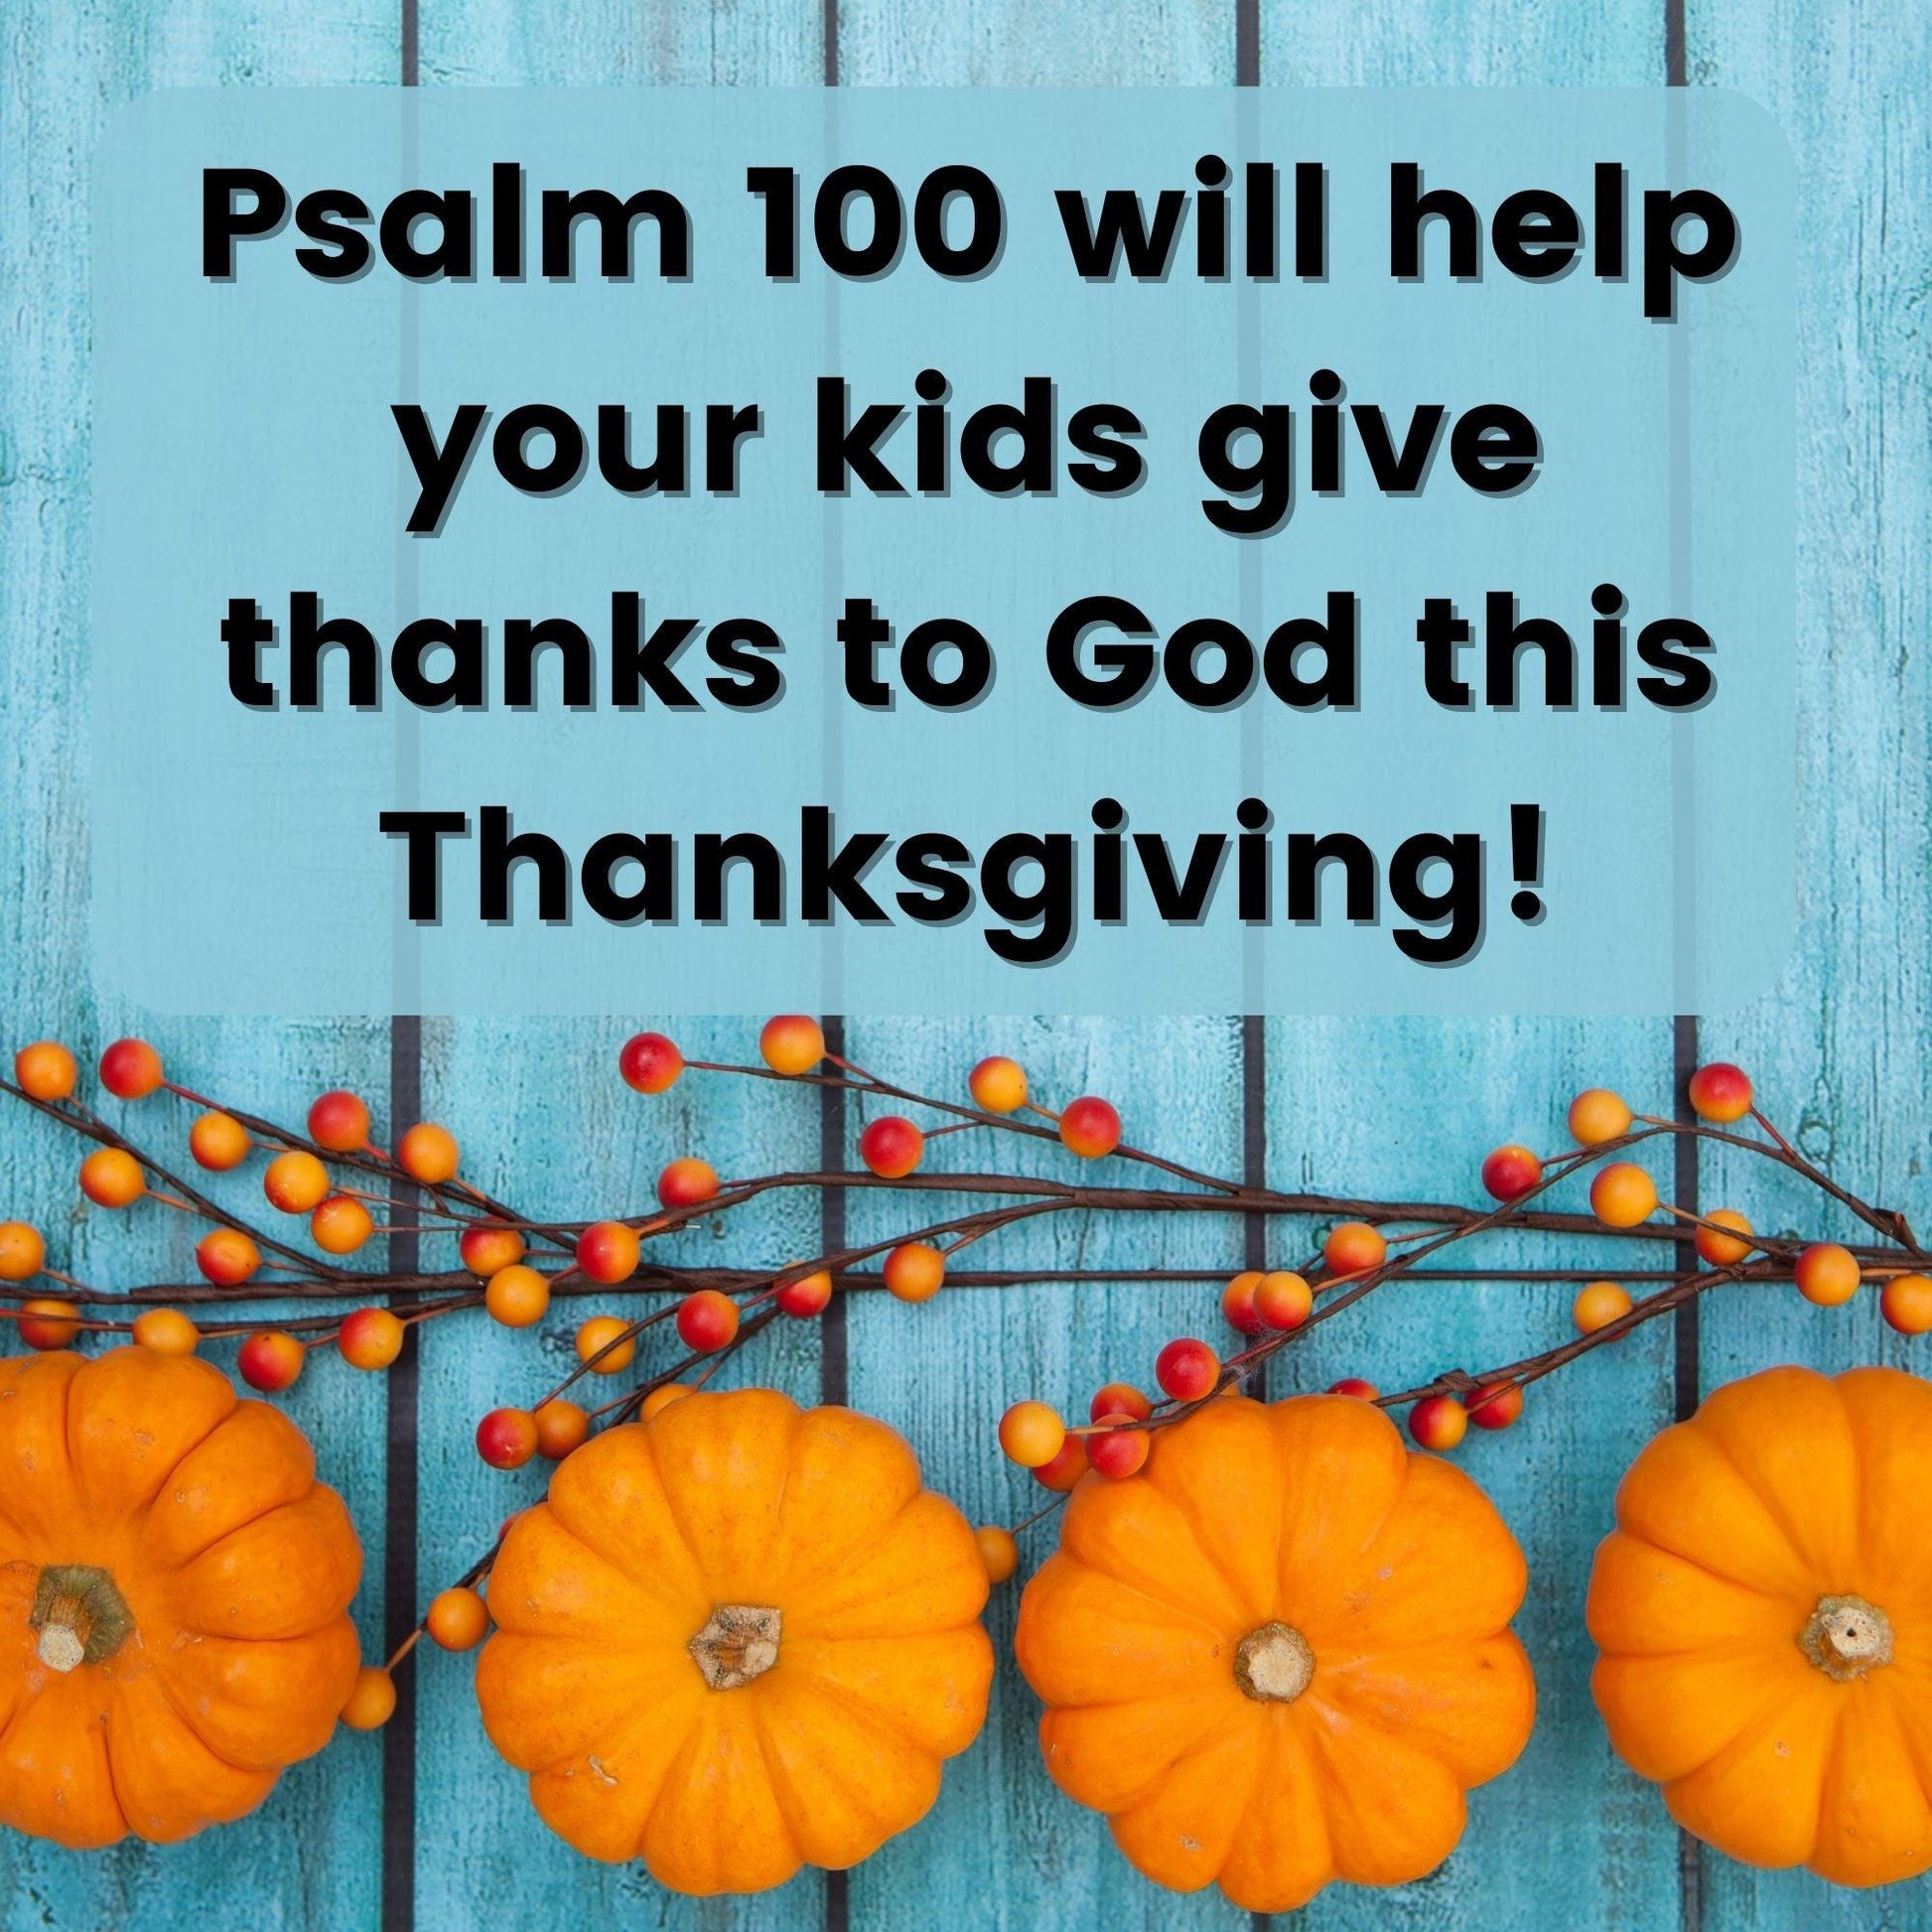 Give Thanks: A Thanksgiving Bible Lesson from Psalm 100 (download only) - Sunday School Store 